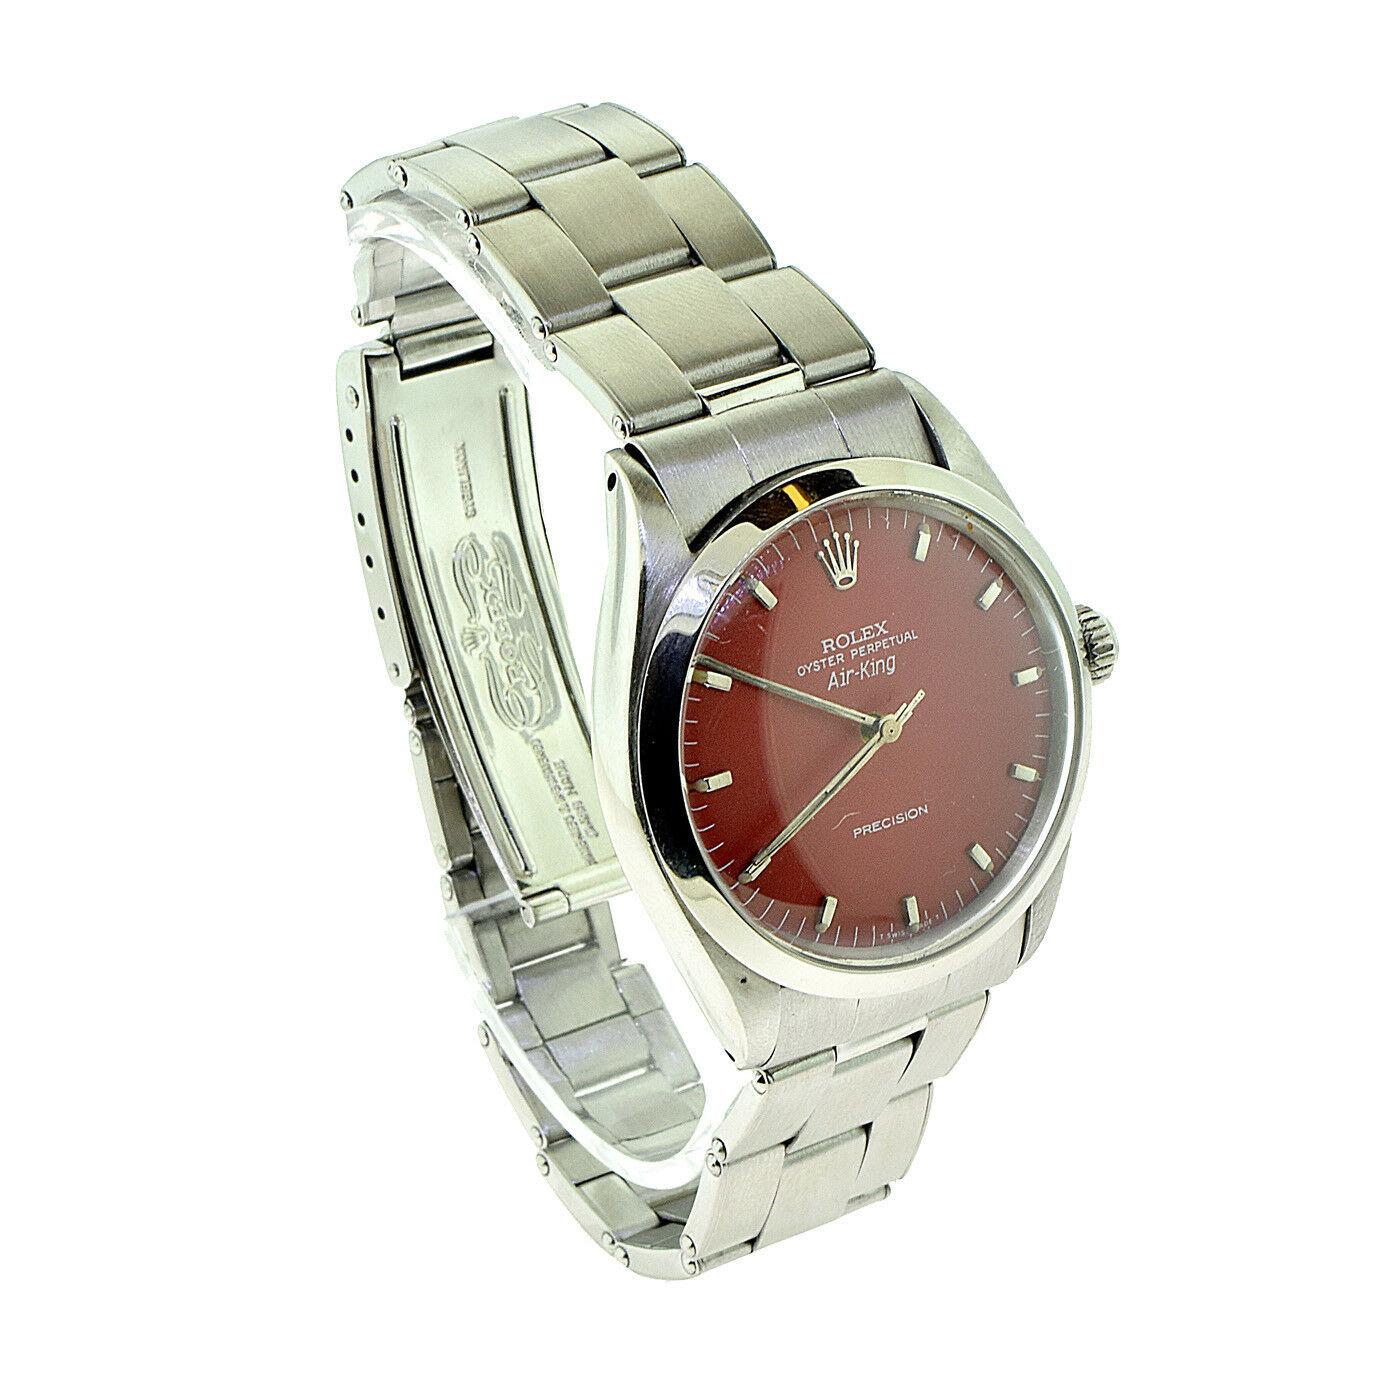 Brilliance Jewels, Miami
Questions? Call Us Anytime!
786,482,8100

Brand: Rolex

Model Name: Air King

Model Number: 5500

Movement: Automatic

Jewels: 26 Jewels 

Case Size: 34 mm 

Case Material: Stainless Steel

Dial Color: Maroon/Burgundy

Hour